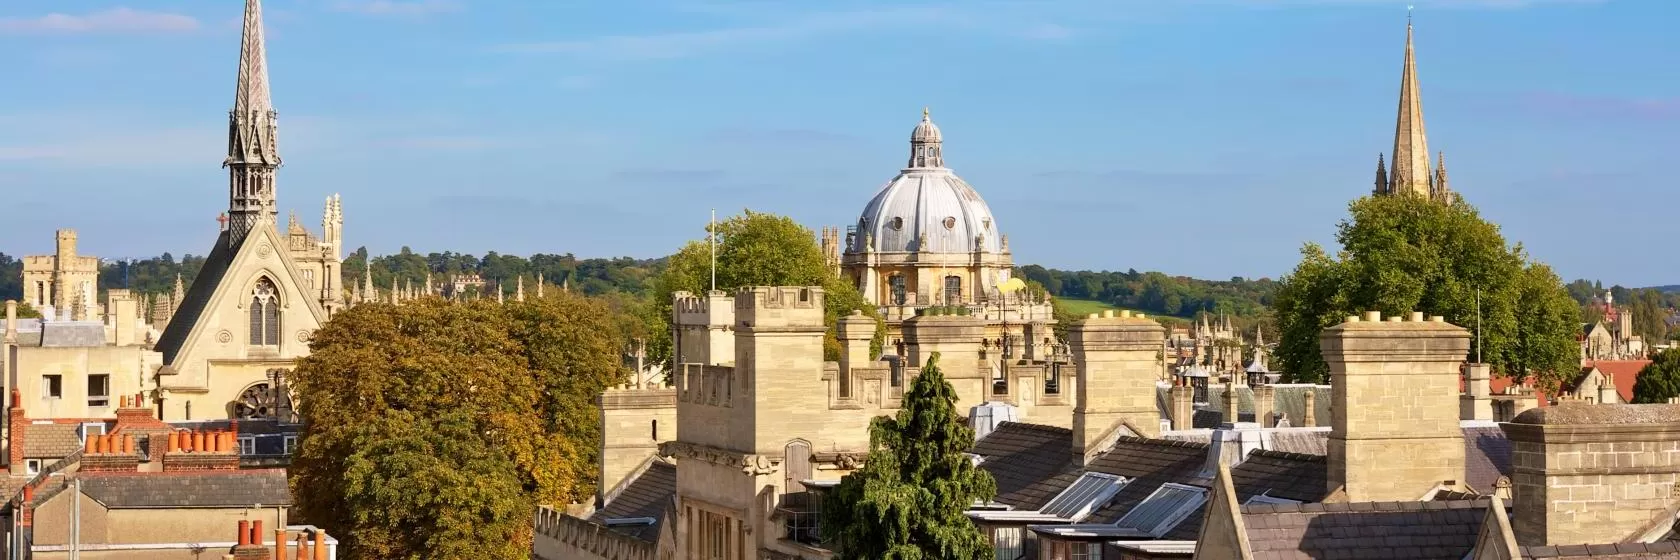 Oxford, Oxfordshire Hotels